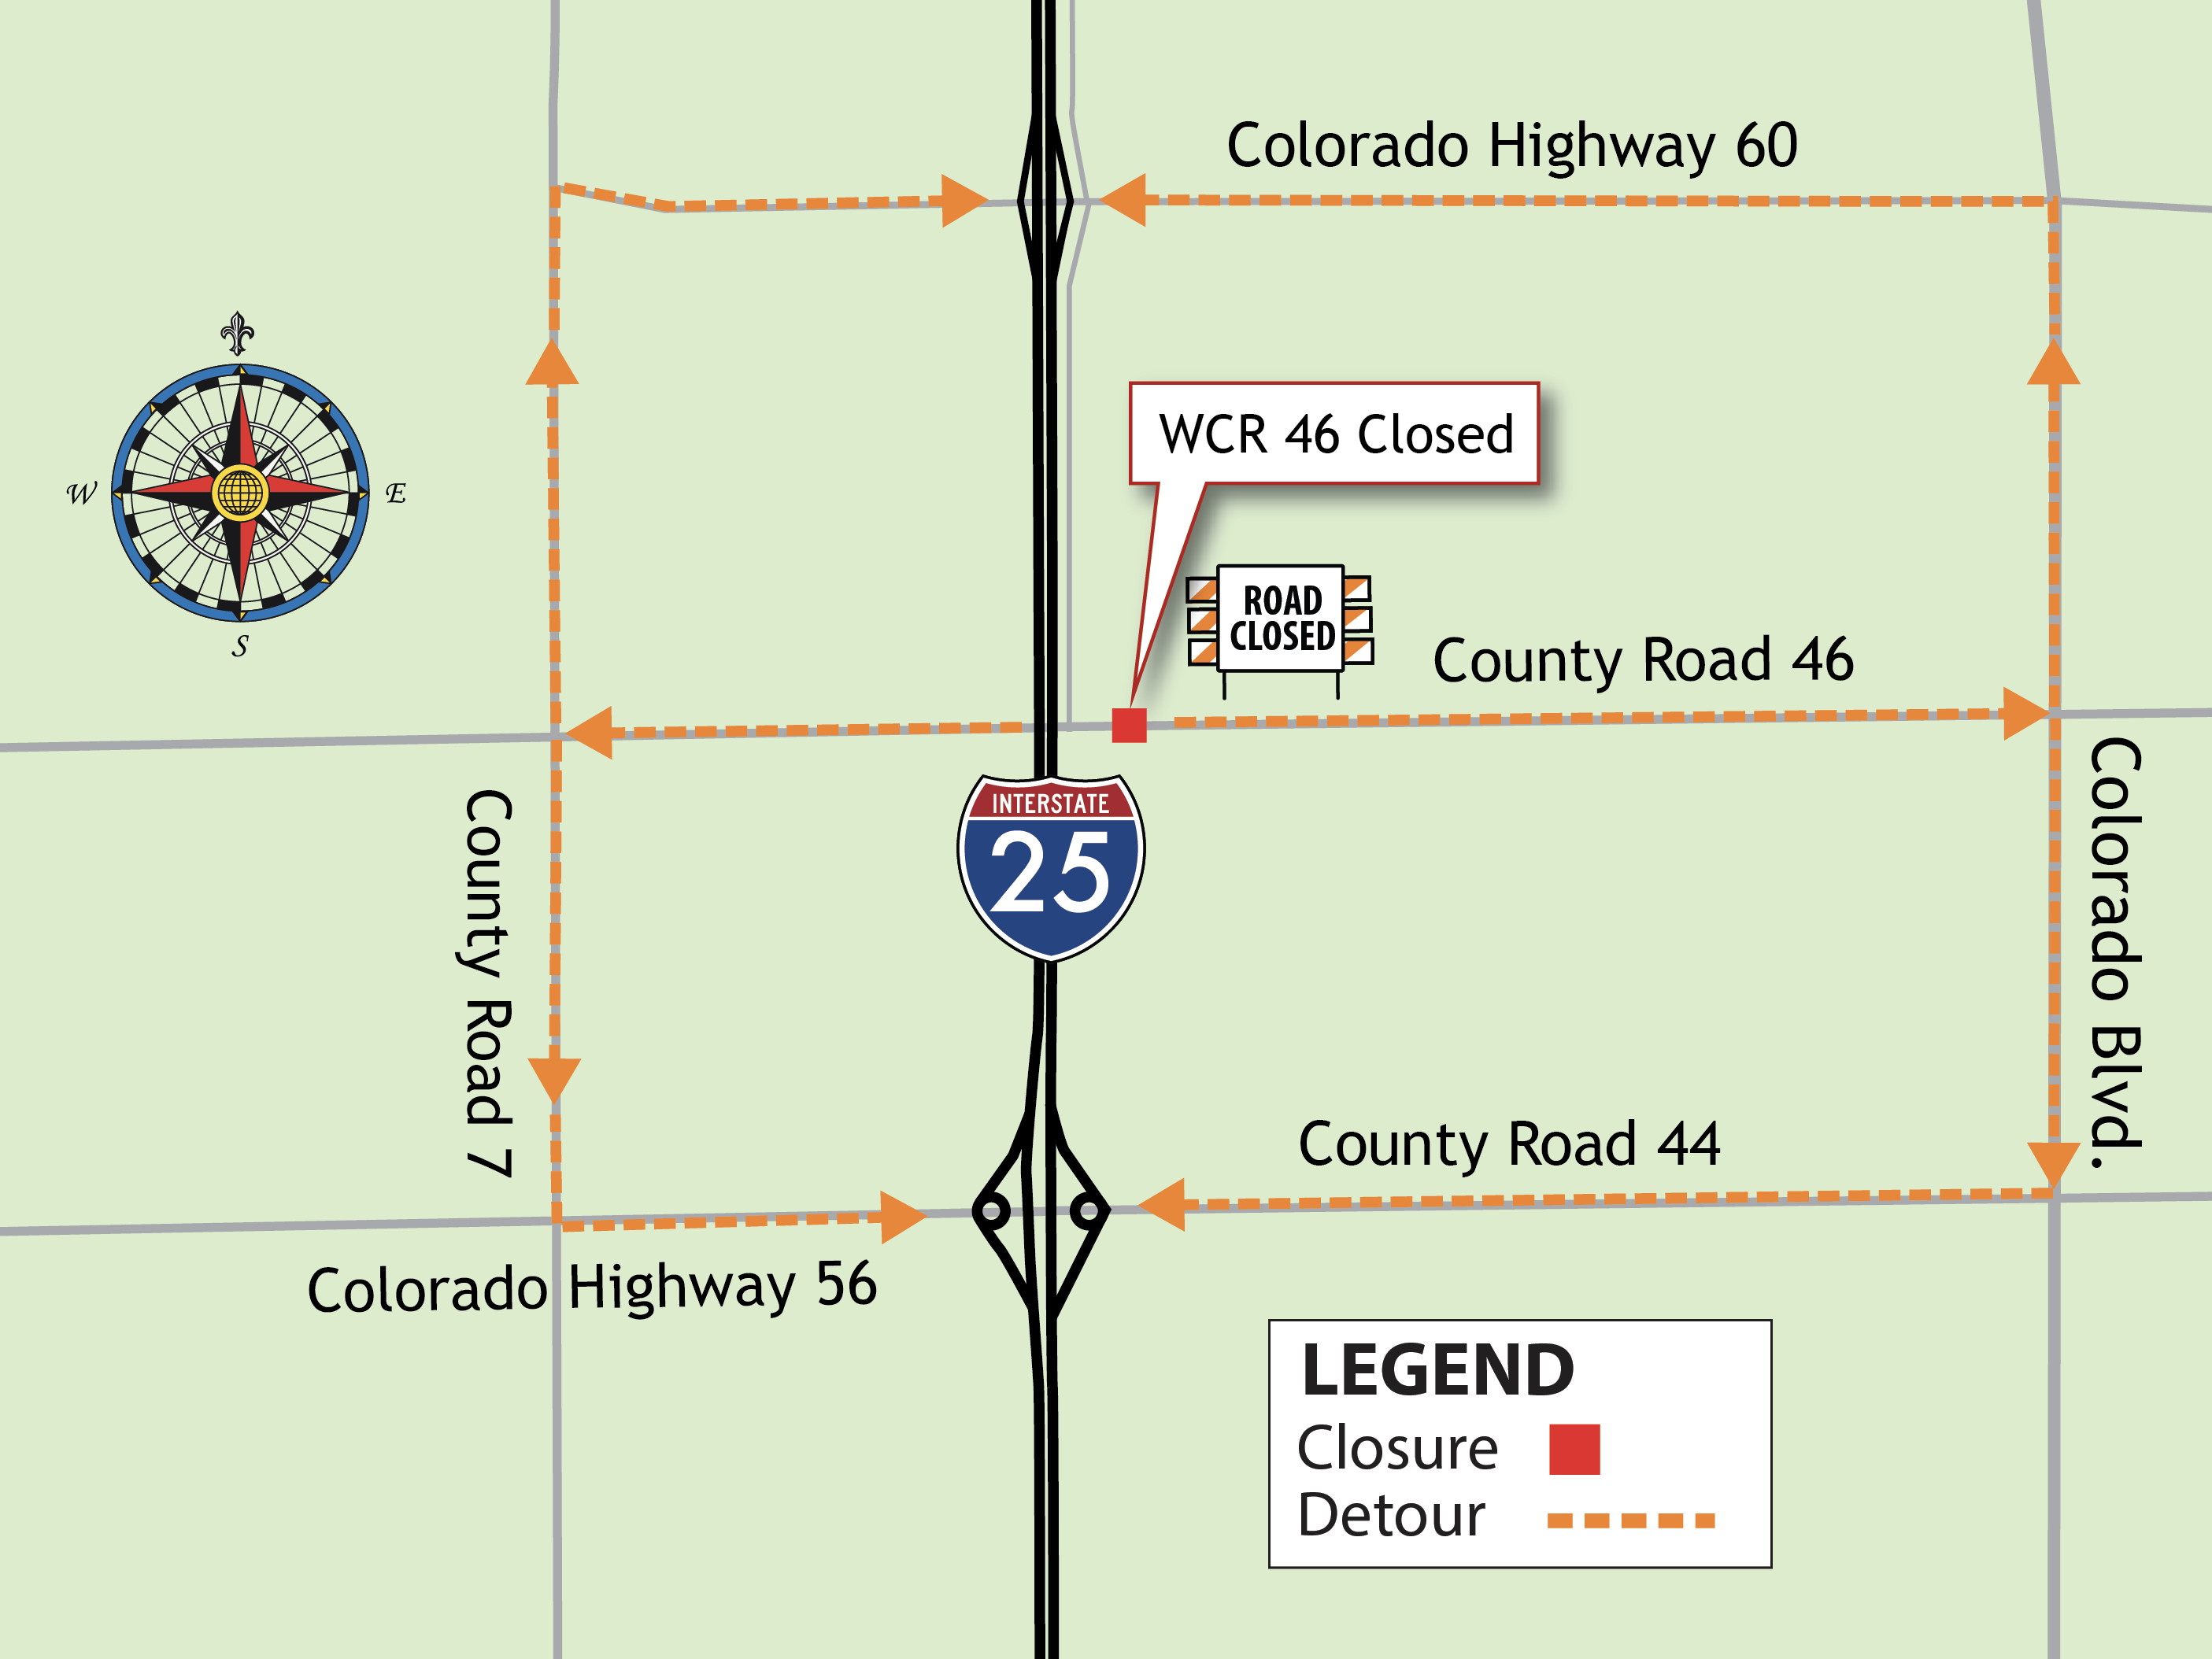 WCR 46 Closure map between CO 60 and County Road 44 detail image